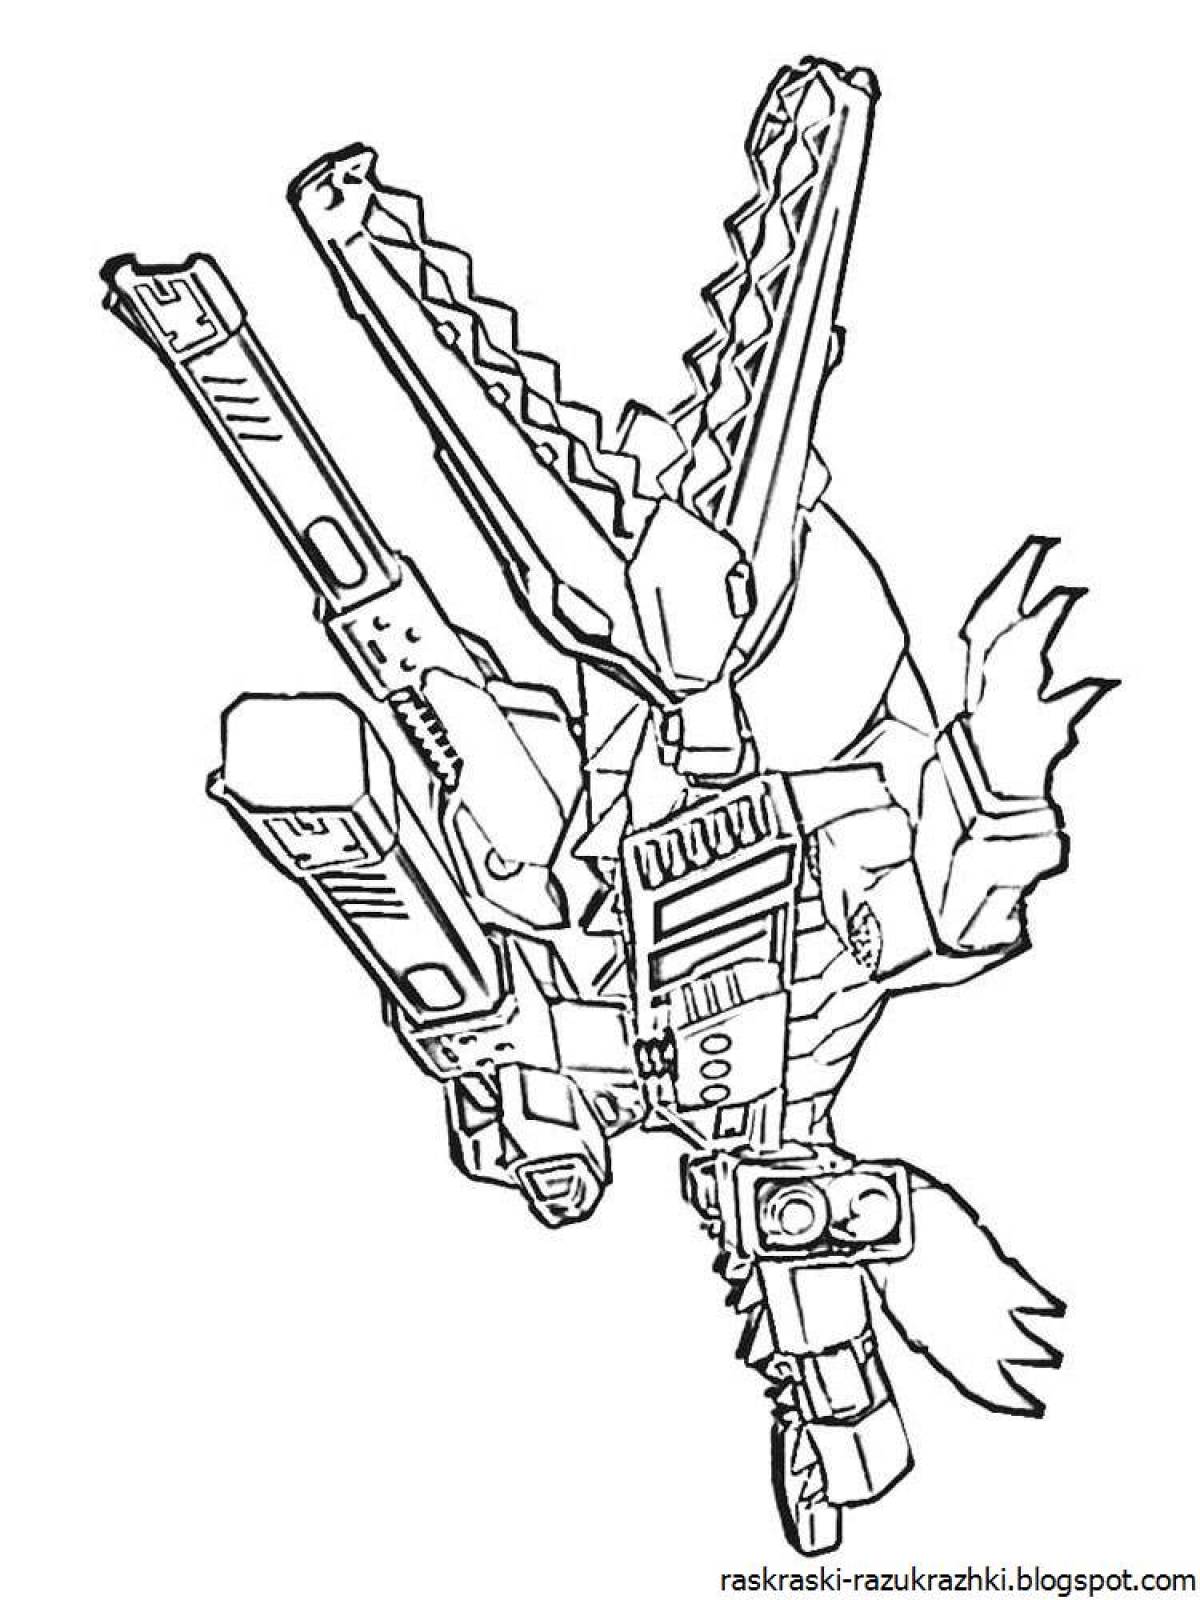 Glowing screamers coloring page